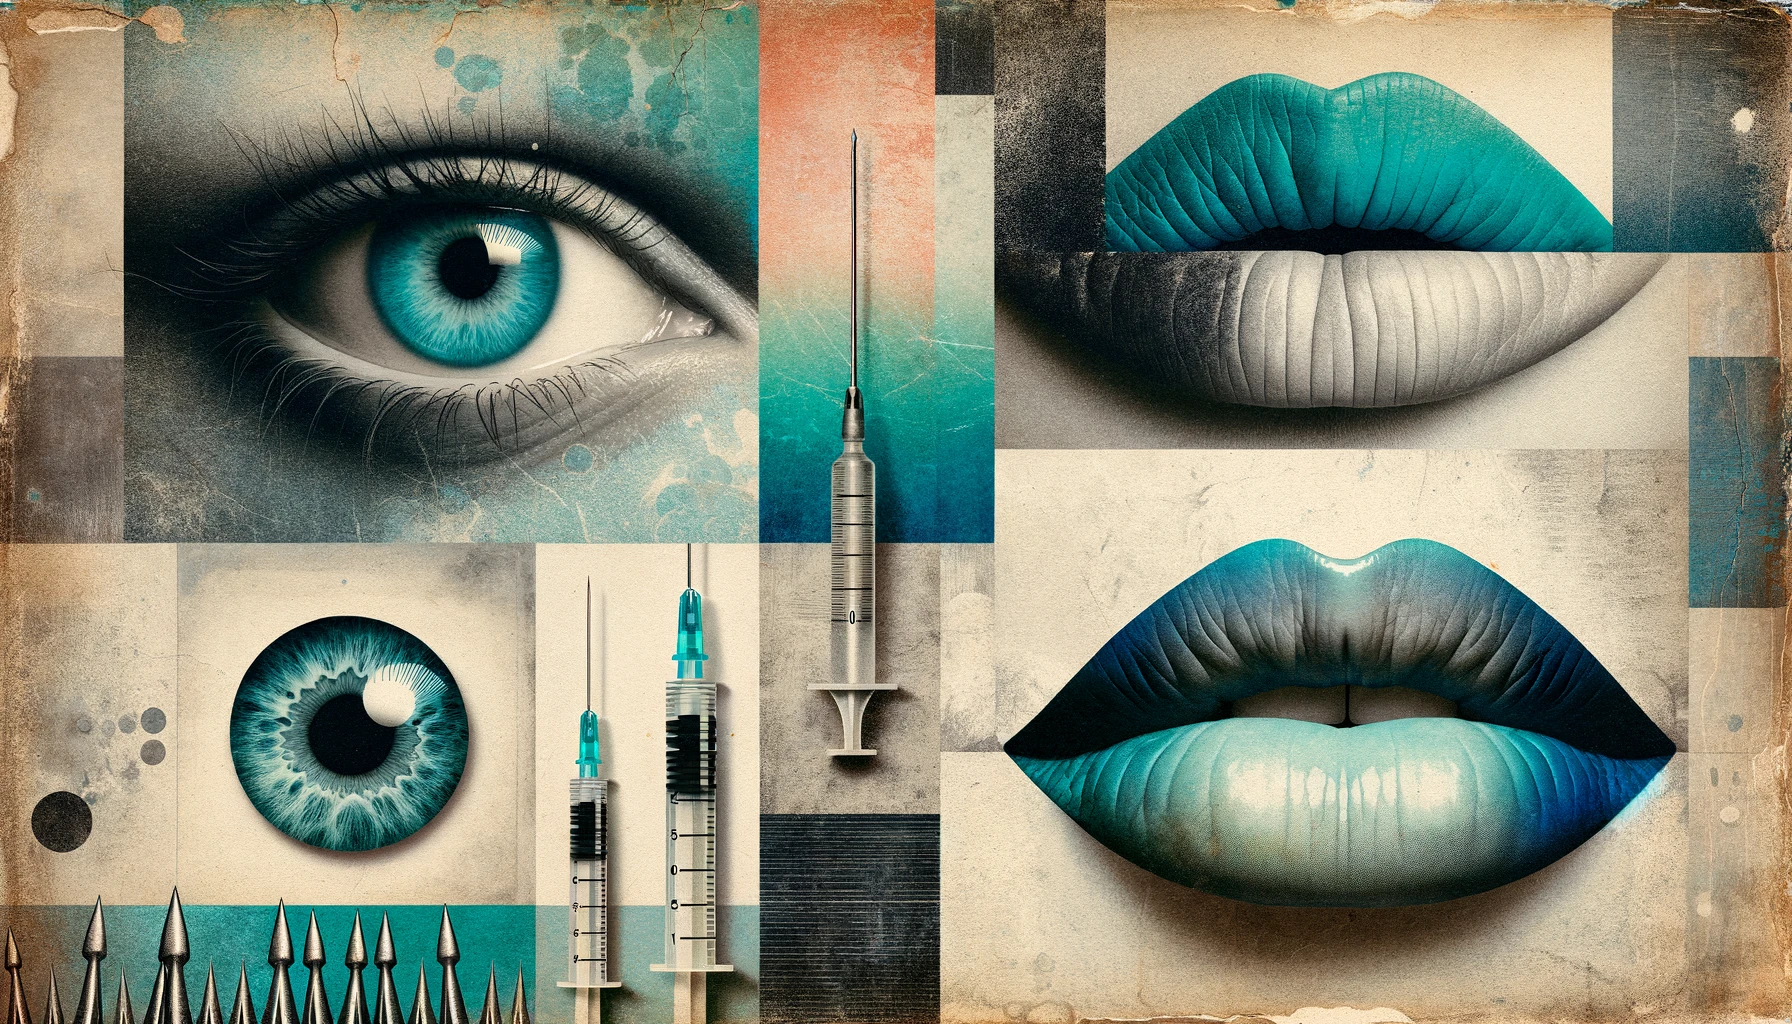 A surreal digital collage featuring an array of elements including two distinct eyes and a pair of oversized, gradient blue lips. The background has a textured appearance with gradations of blue, simulating a rough, painted surface. One eye is smaller with a light blue hue, viewed from the side, while the other eye is larger, rendered in grayscale with a naturally colored pupil, and appears to be pierced by a screwdriver. The lips are luscious with a glossy finish, transitioning from light to dark blue. Abstract shapes with black, white, and blue patterns are scattered throughout, with barbed wire running along the bottom and a realistically depicted syringe with a sharp needle pointing upwards, giving a metallic shine. The composition is vibrant yet unsettling, evoking a dreamlike and imaginative atmosphere within the specified color scheme.